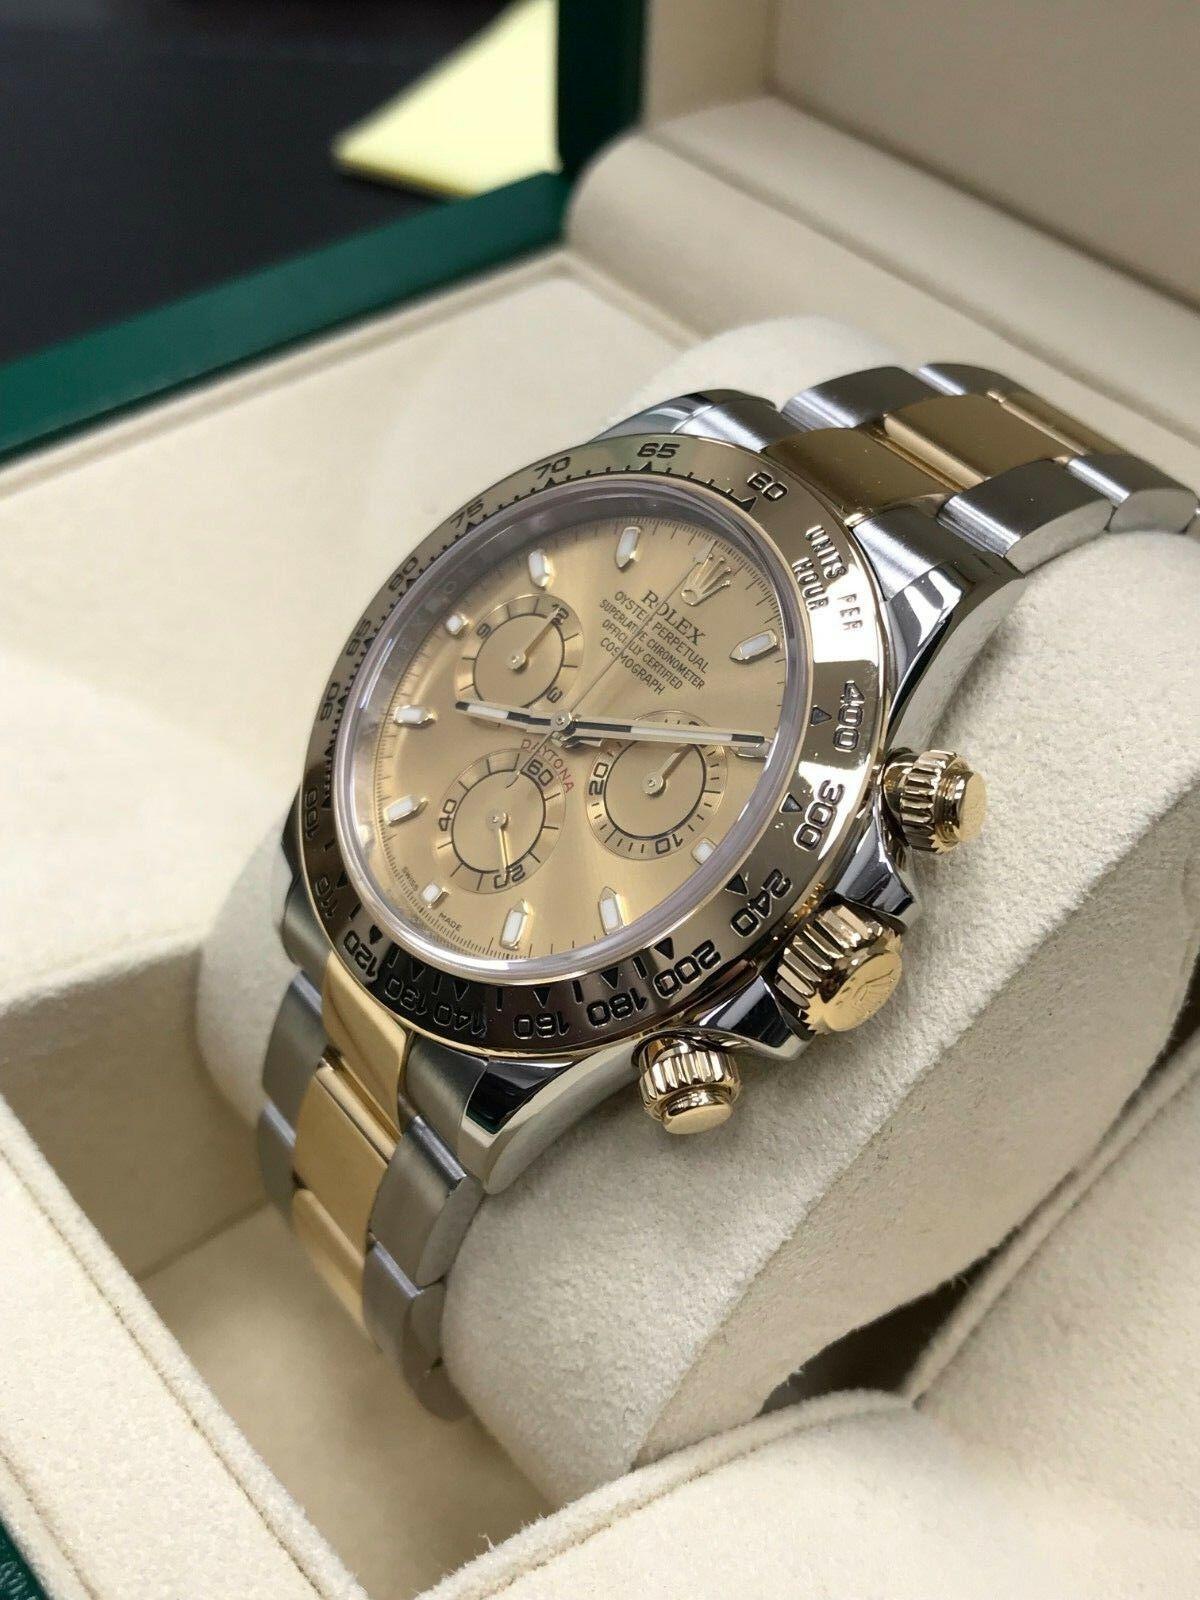 Rolex Daytona 116503 18 Karat Gold and Stainless Steel Champagne Box Papers 2016 1